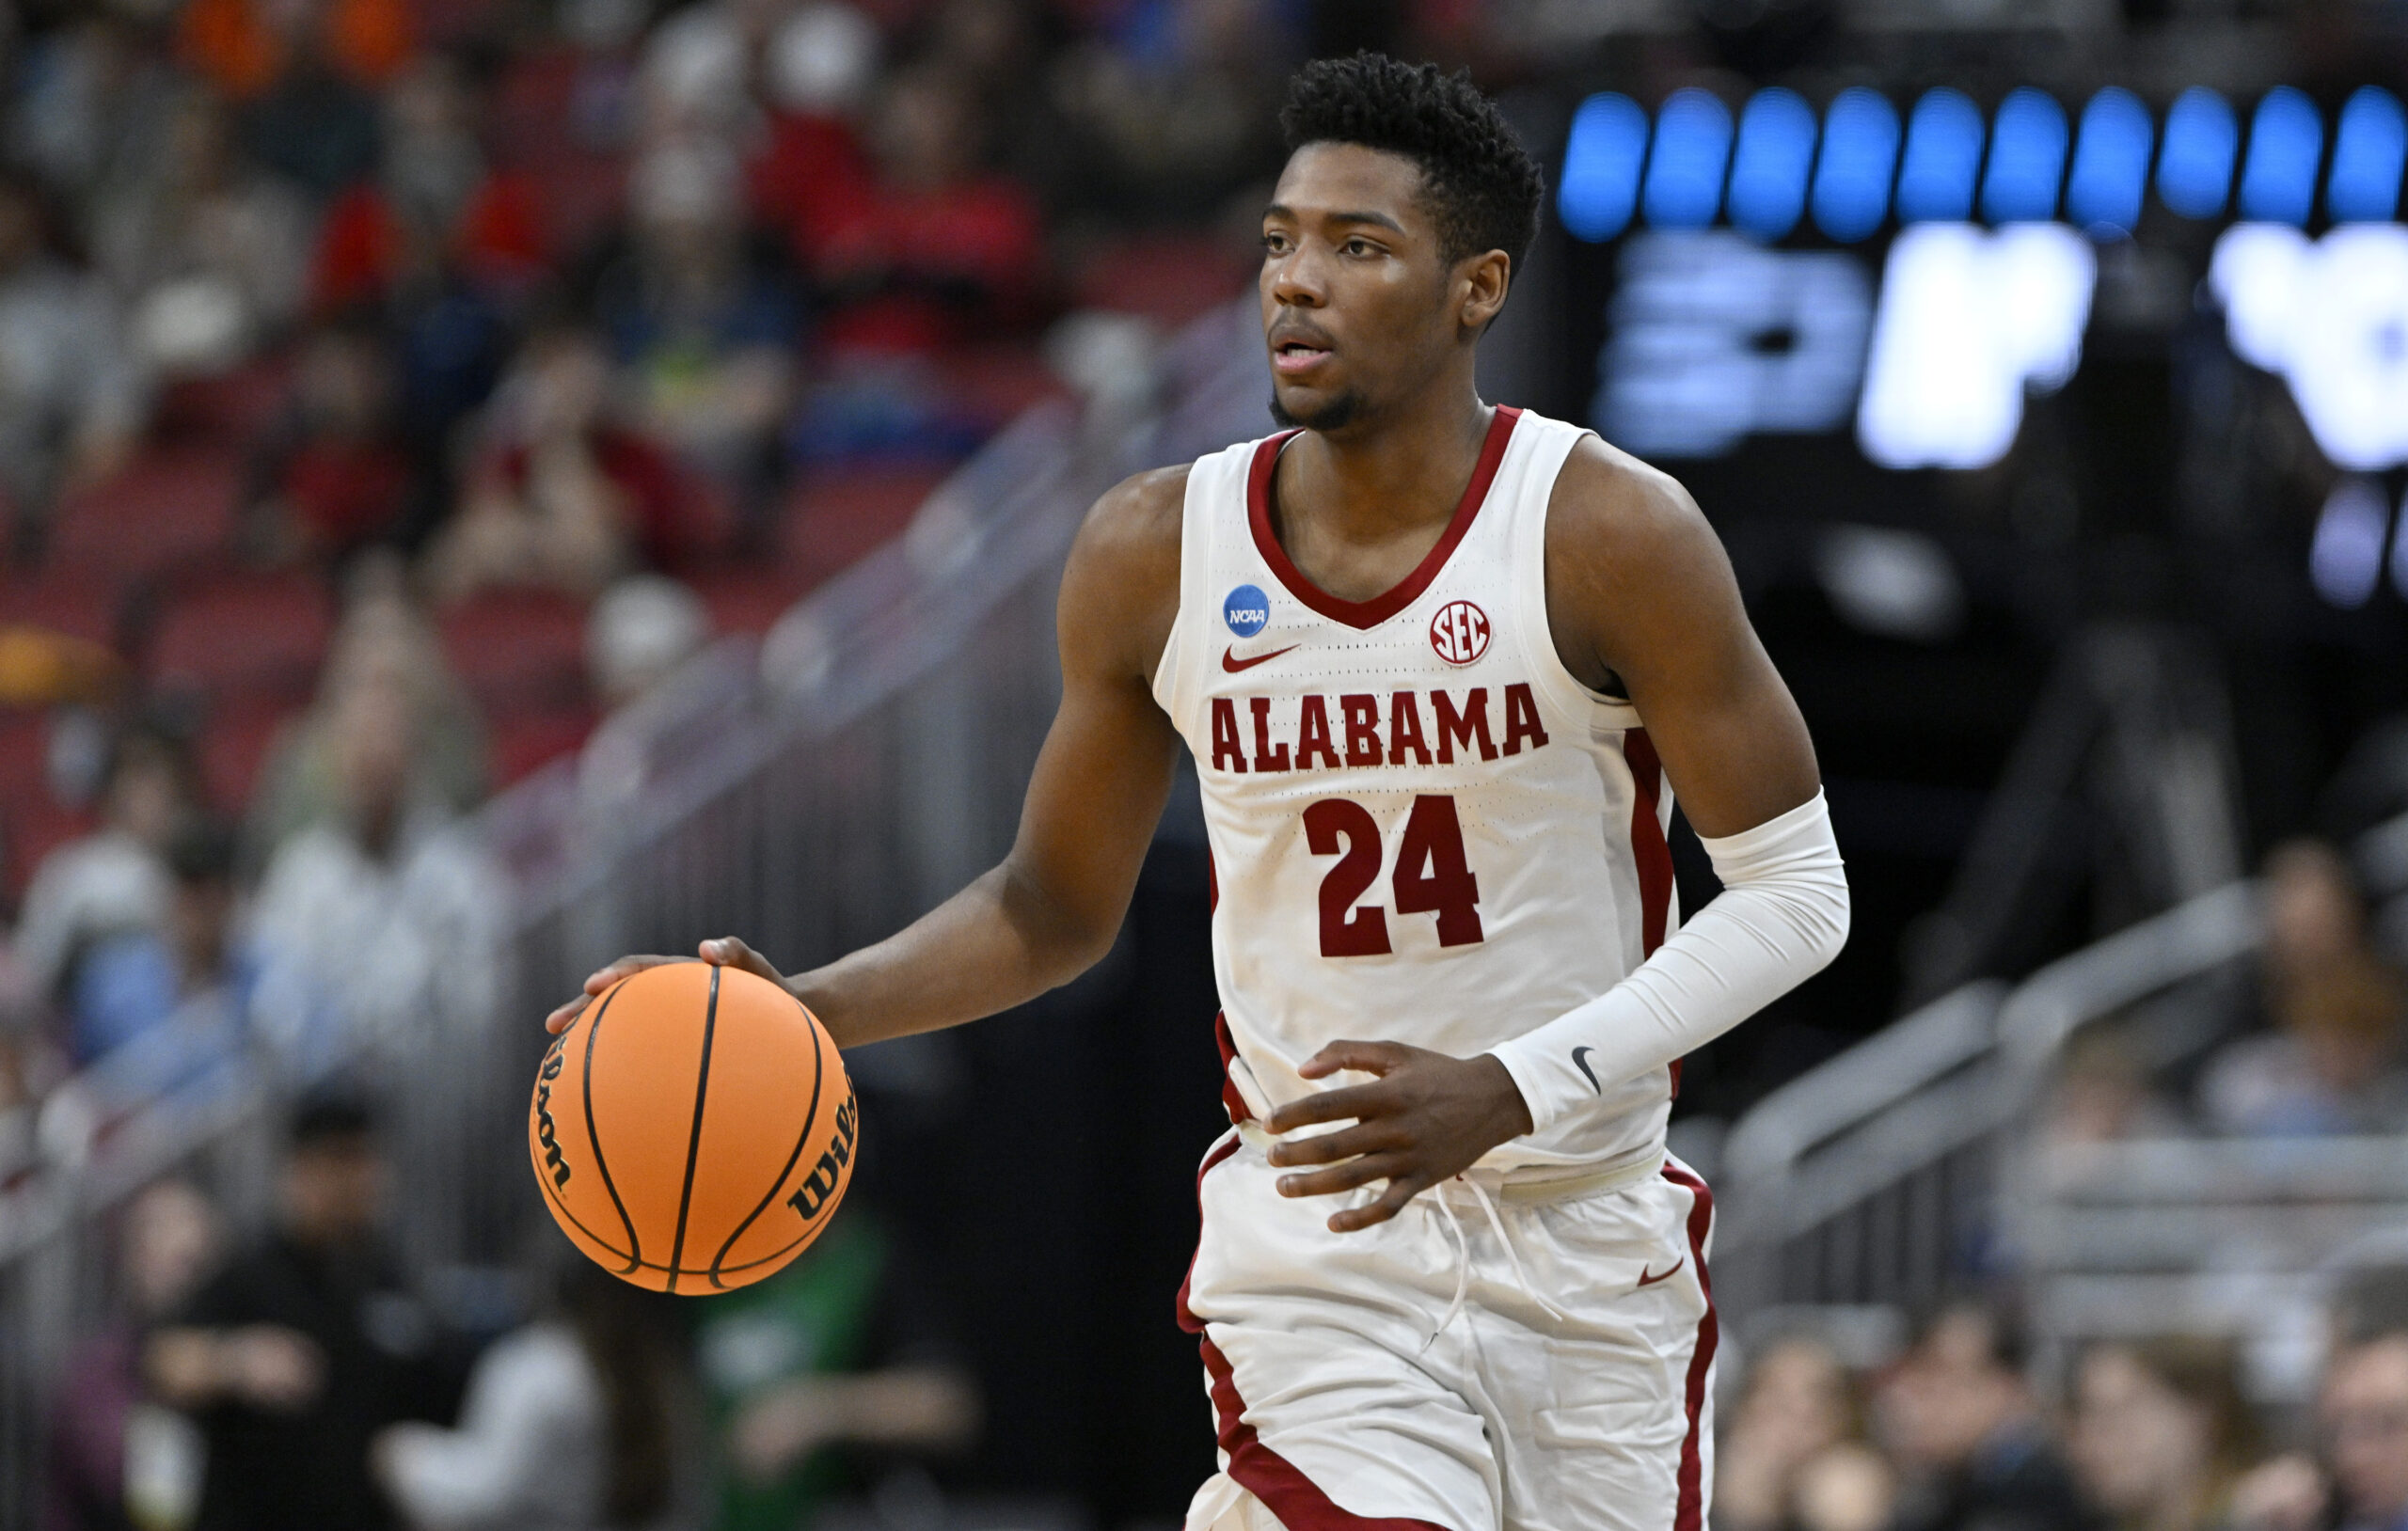 BOX SCORE BREAKDOWN: Stat leaders from Alabama’s disappointing Sweet 16 loss to San Diego State